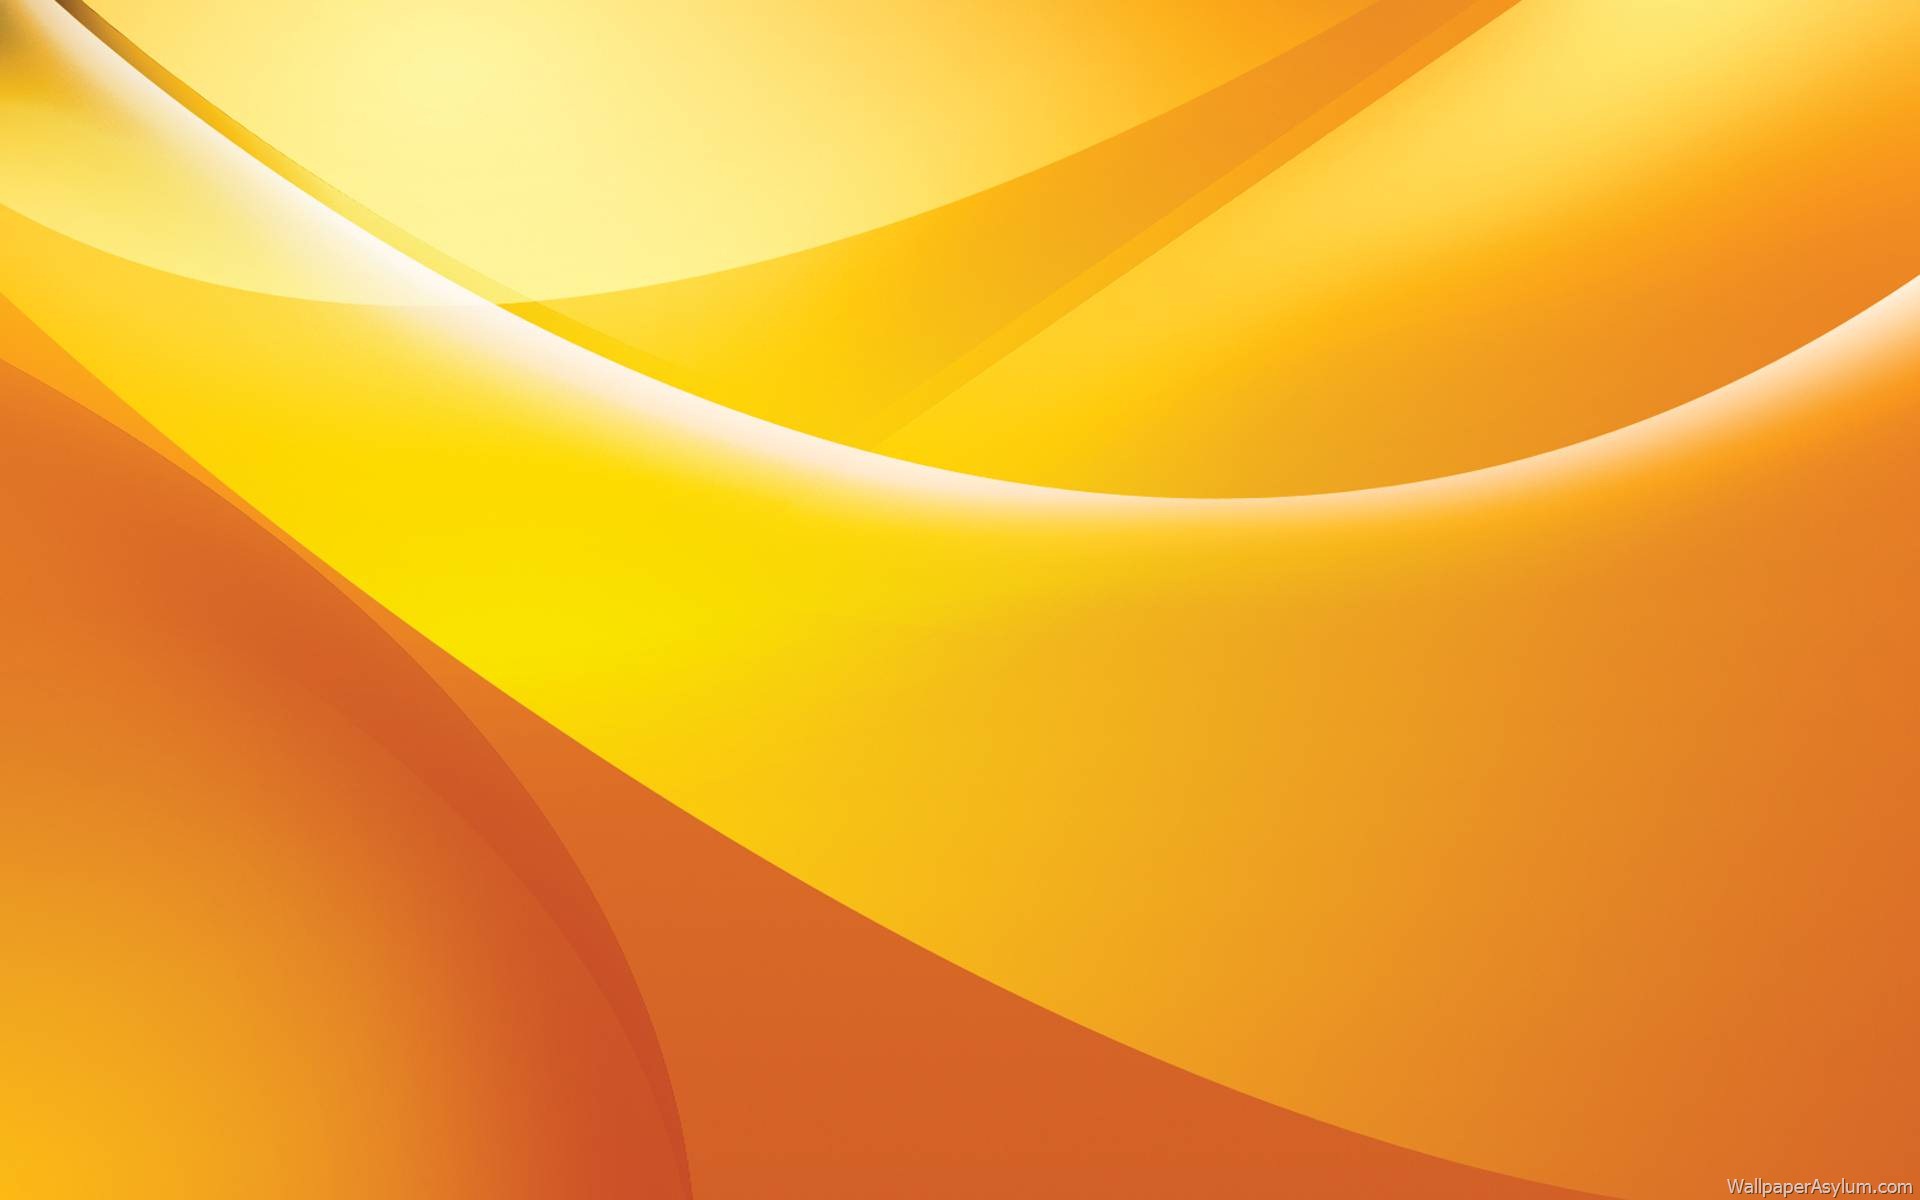 Download These 42 Yellow Wallpapers in High Definition For